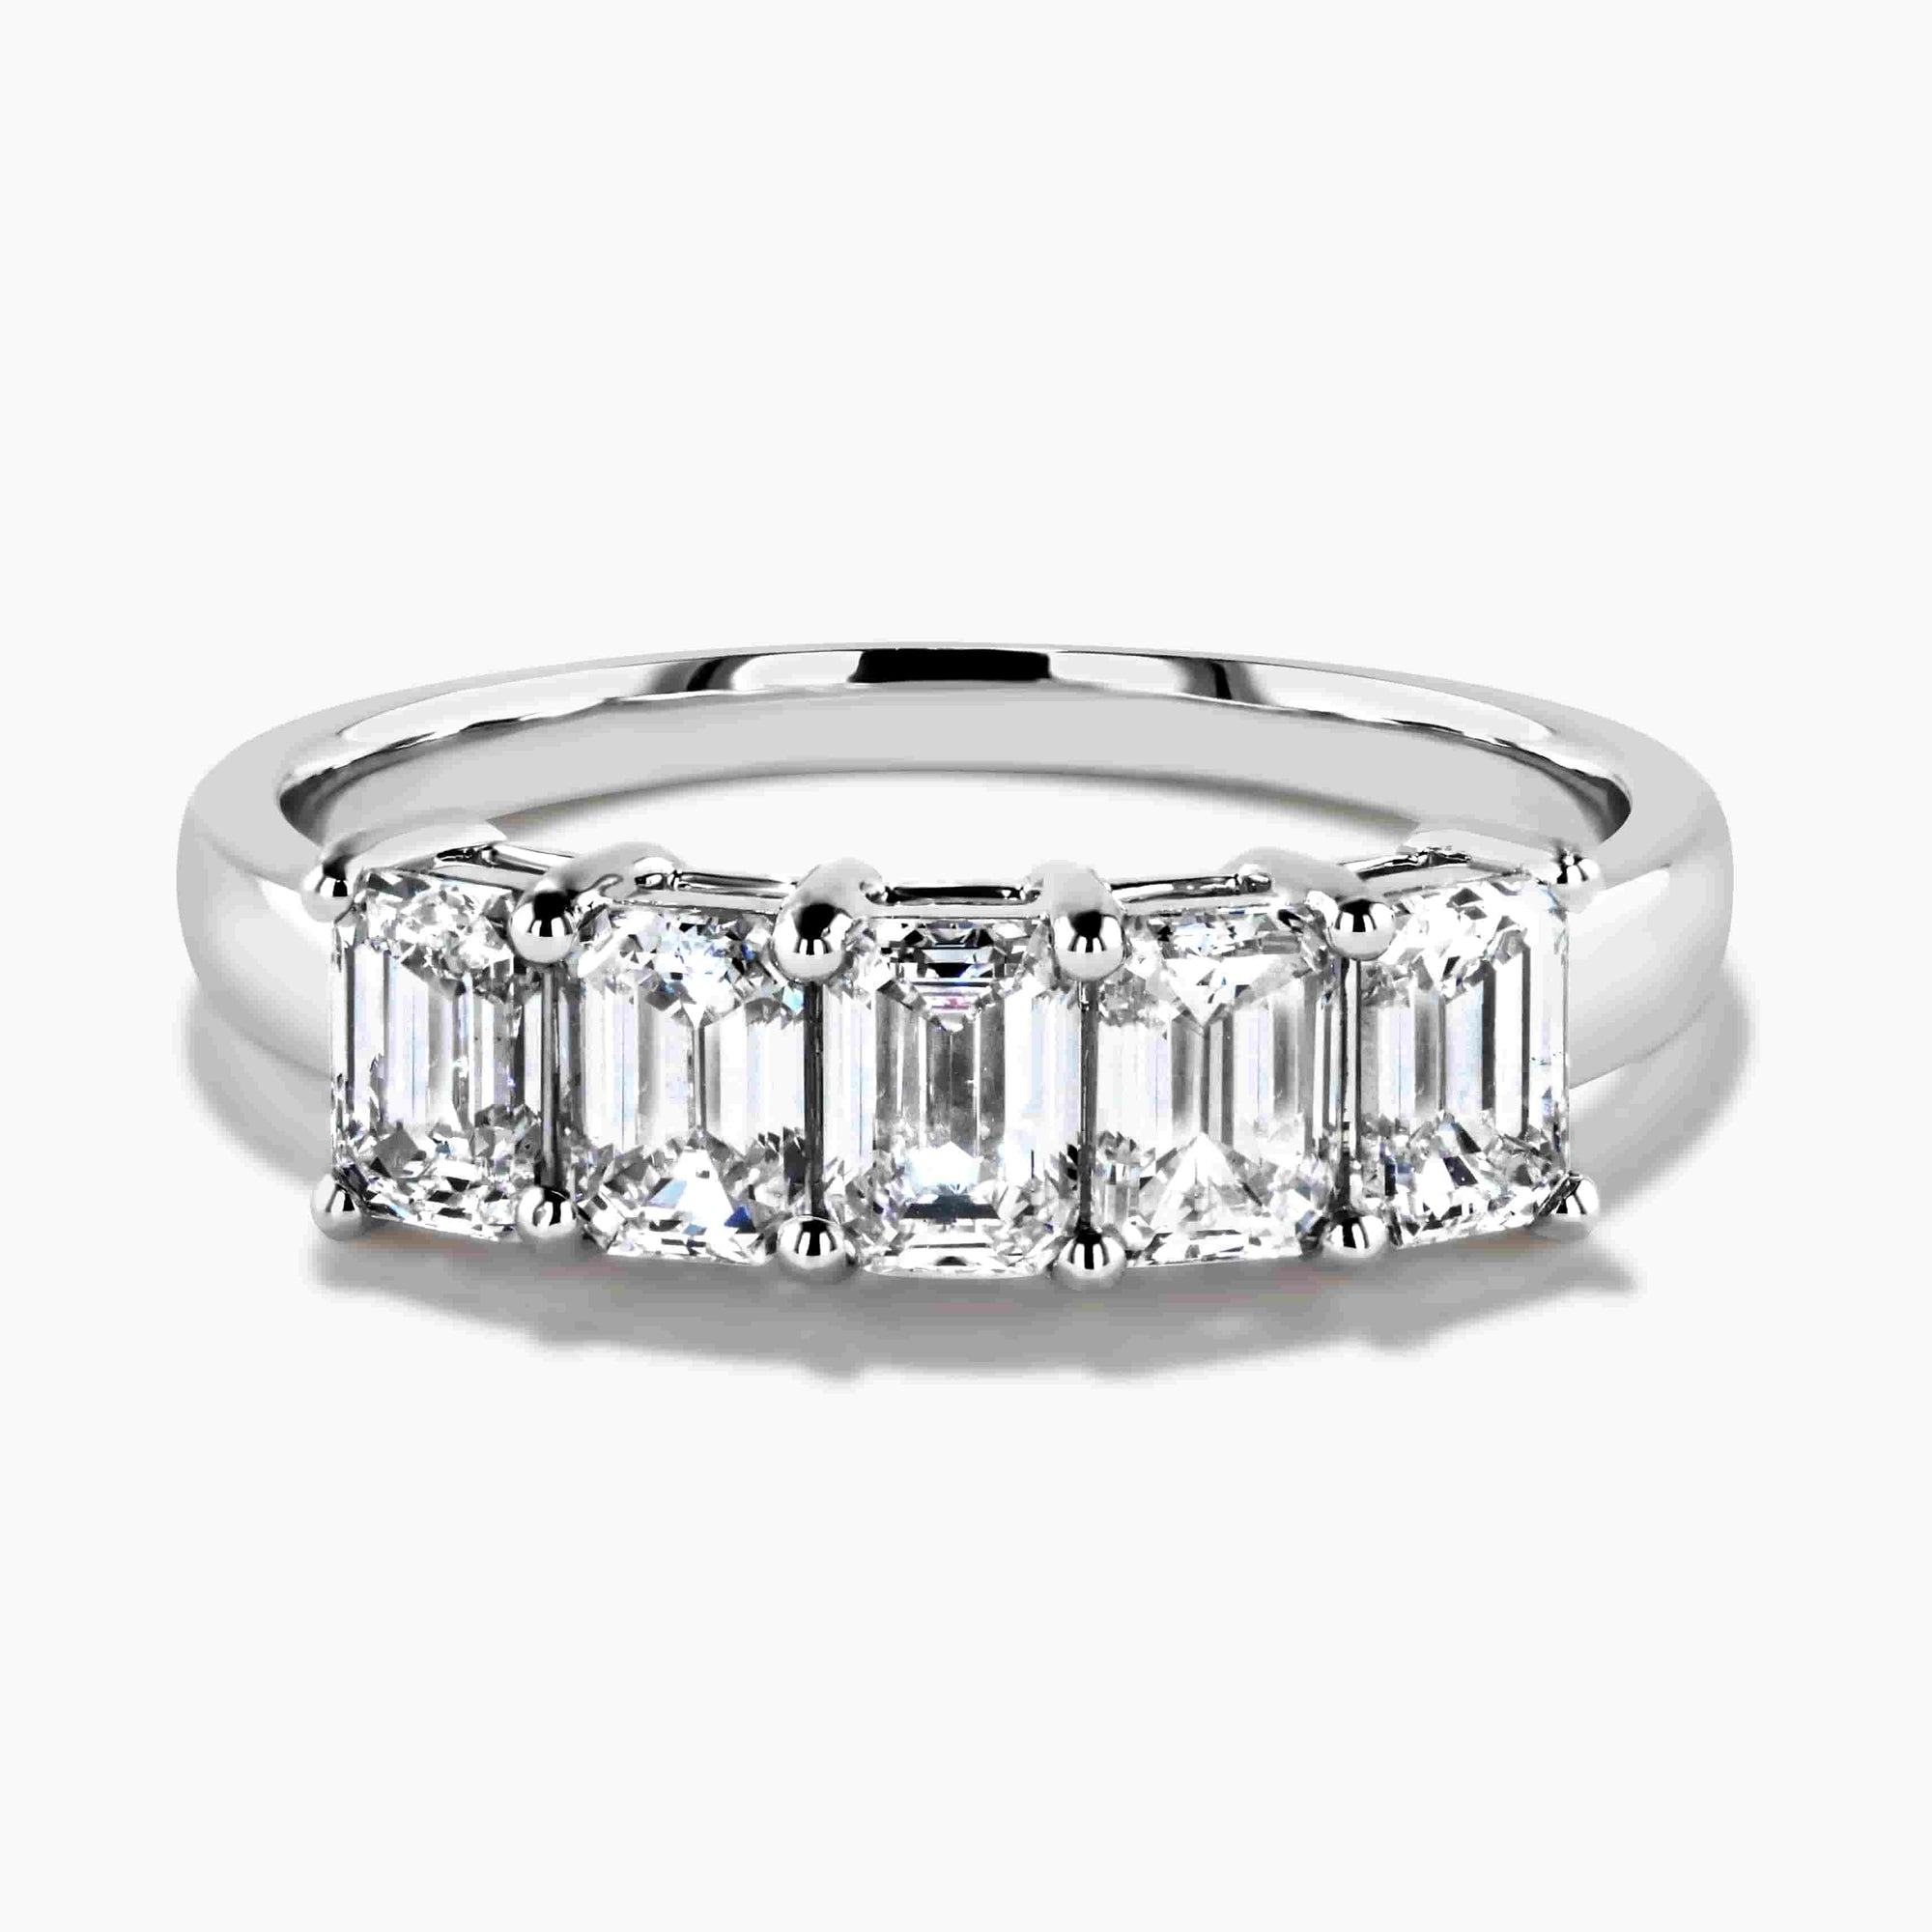 5 Stone Emerald Cut Band Shown In 14K White Gold|emerald cut lab grown diamond band set in 14k recycled white gold metal by MiaDonna